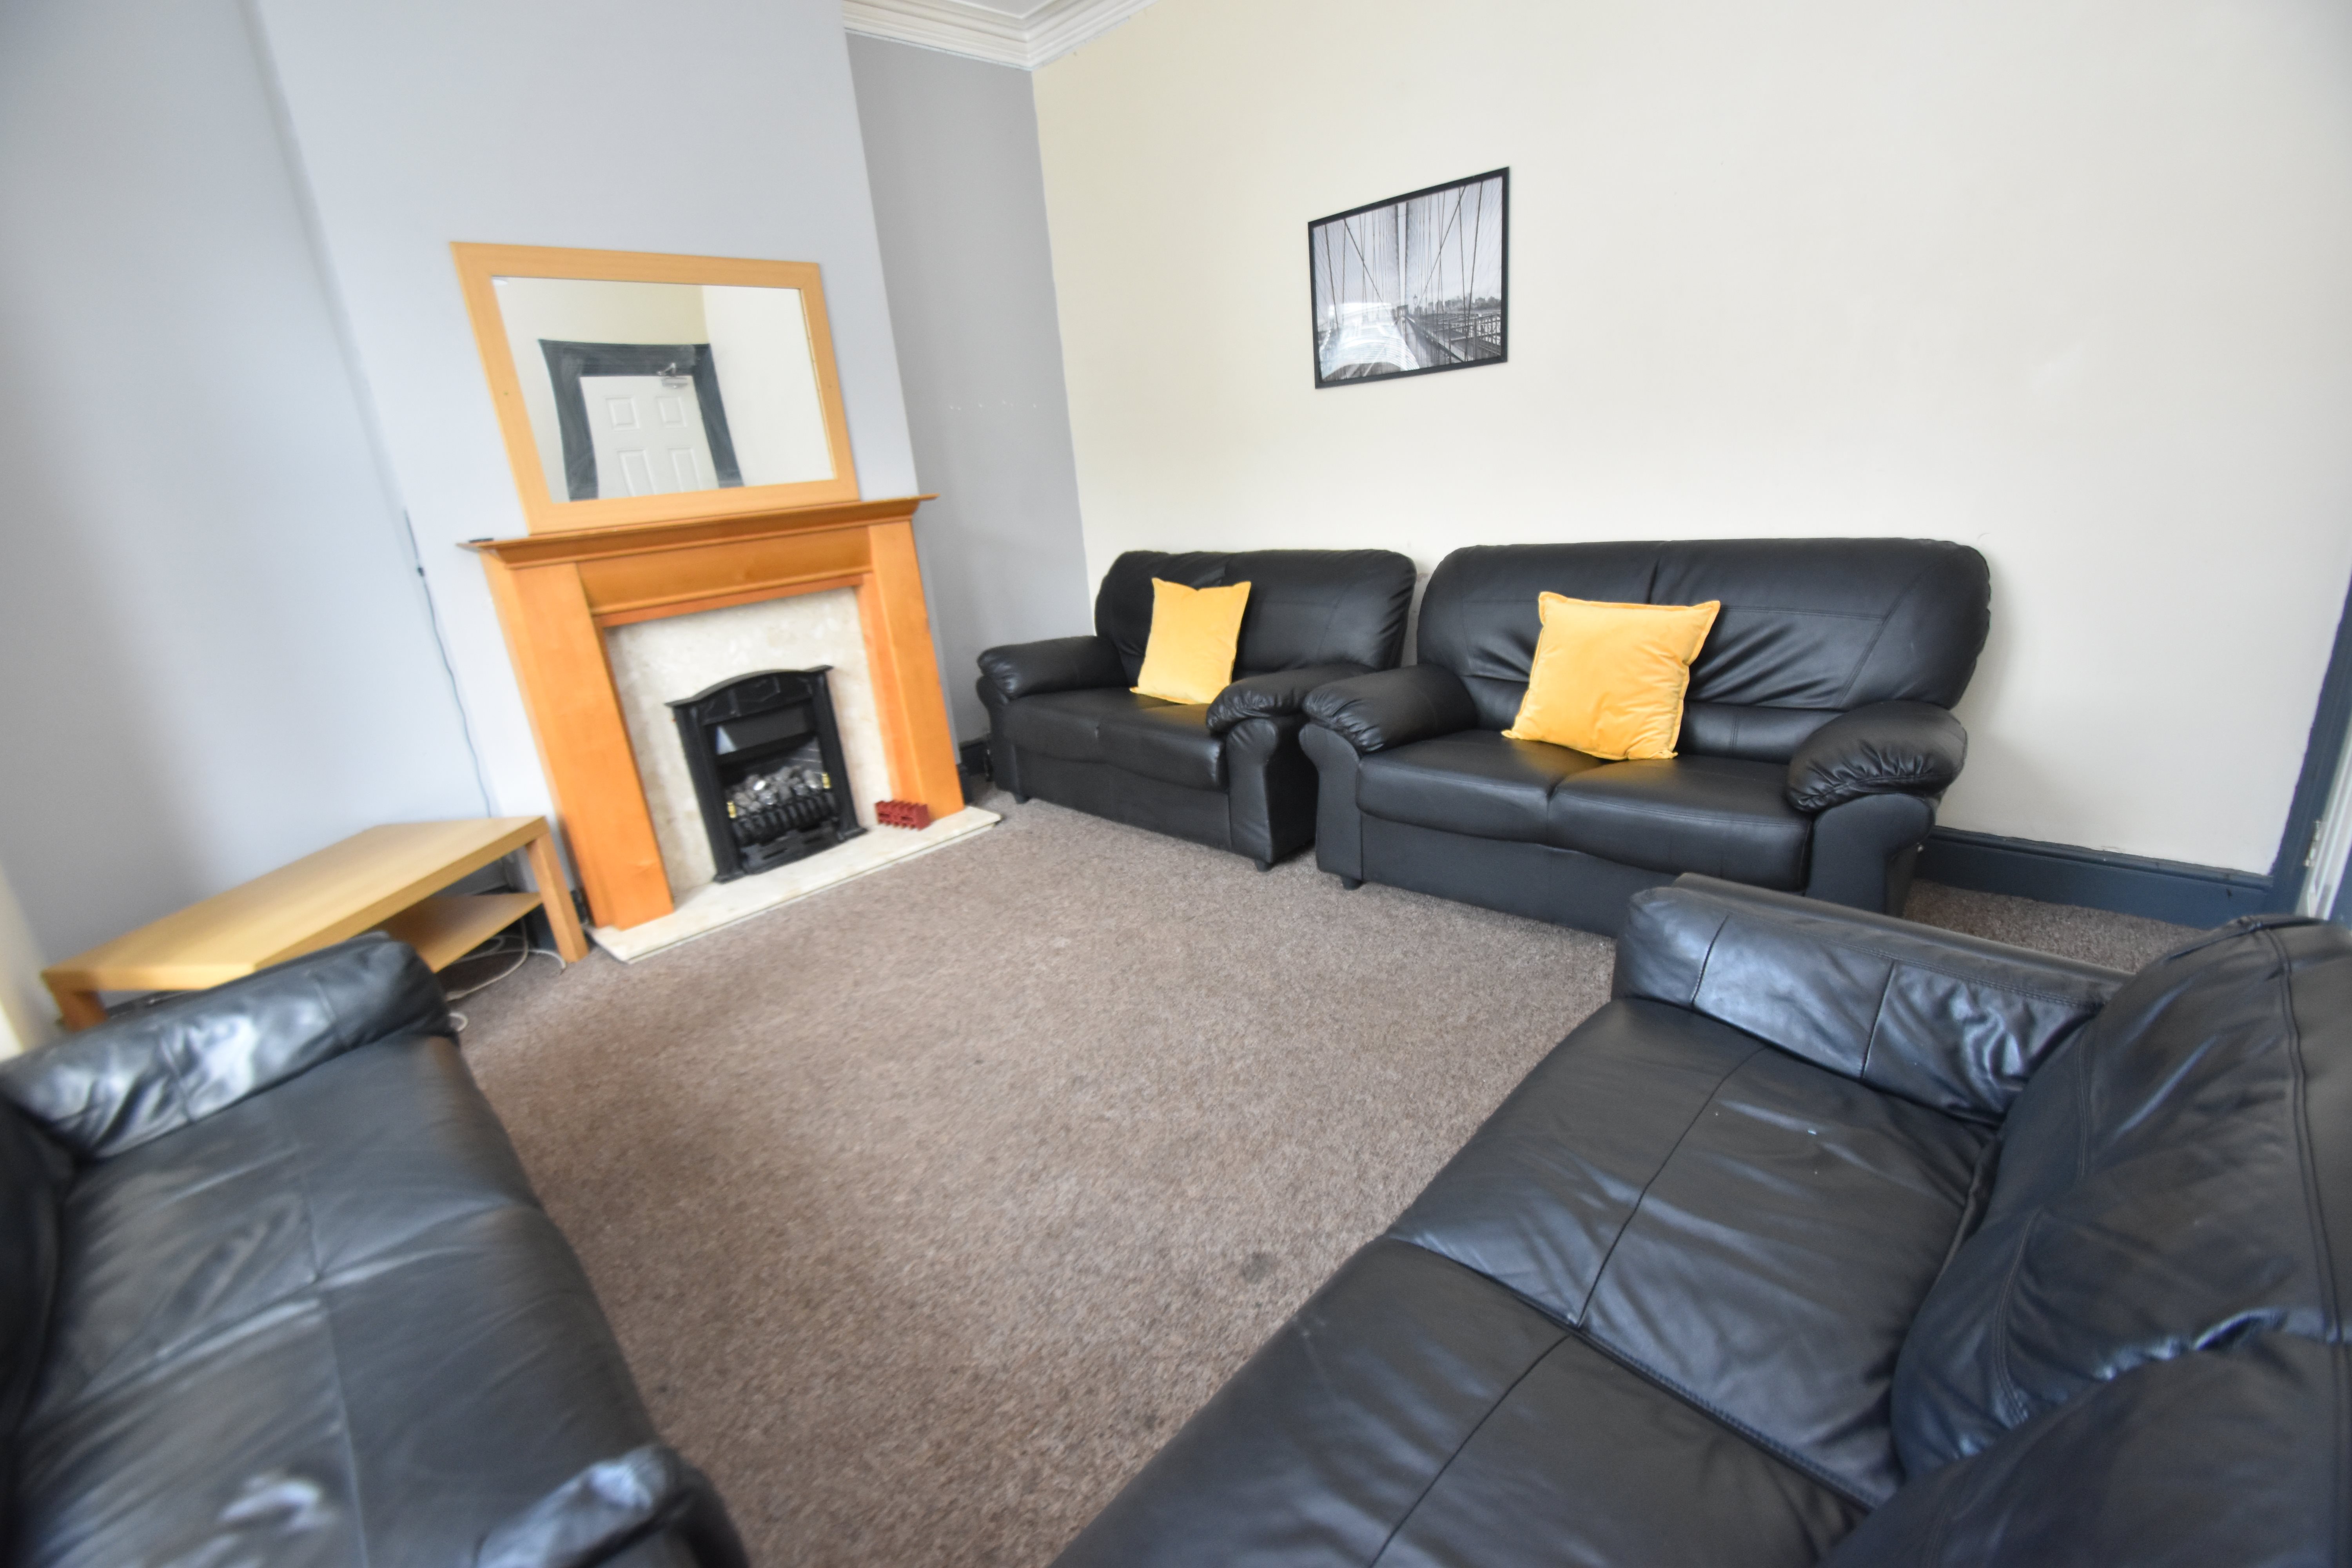 8 bed house to rent in Harriet Street, CATHAYS 3